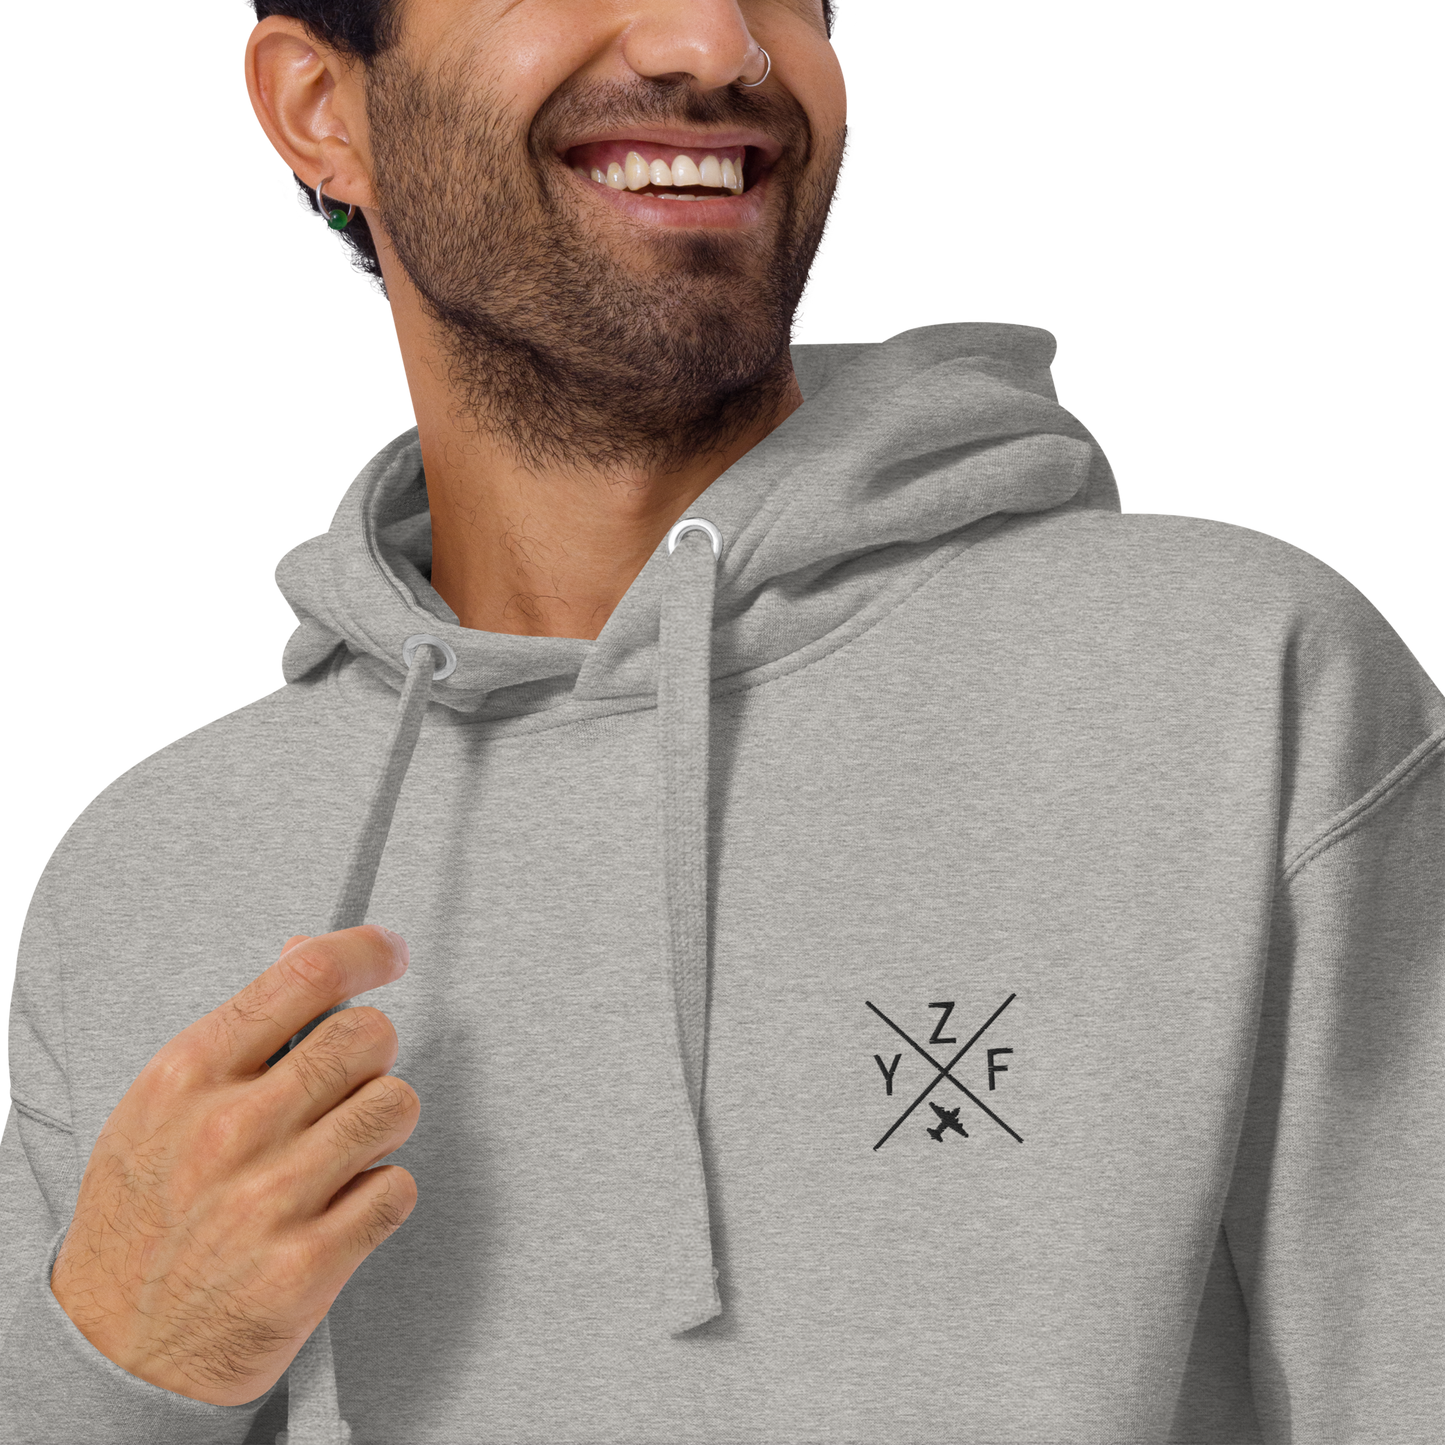 YHM Designs - YZF Yellowknife Premium Hoodie - Crossed-X Design with Airport Code and Vintage Propliner - Black Embroidery - Image 15